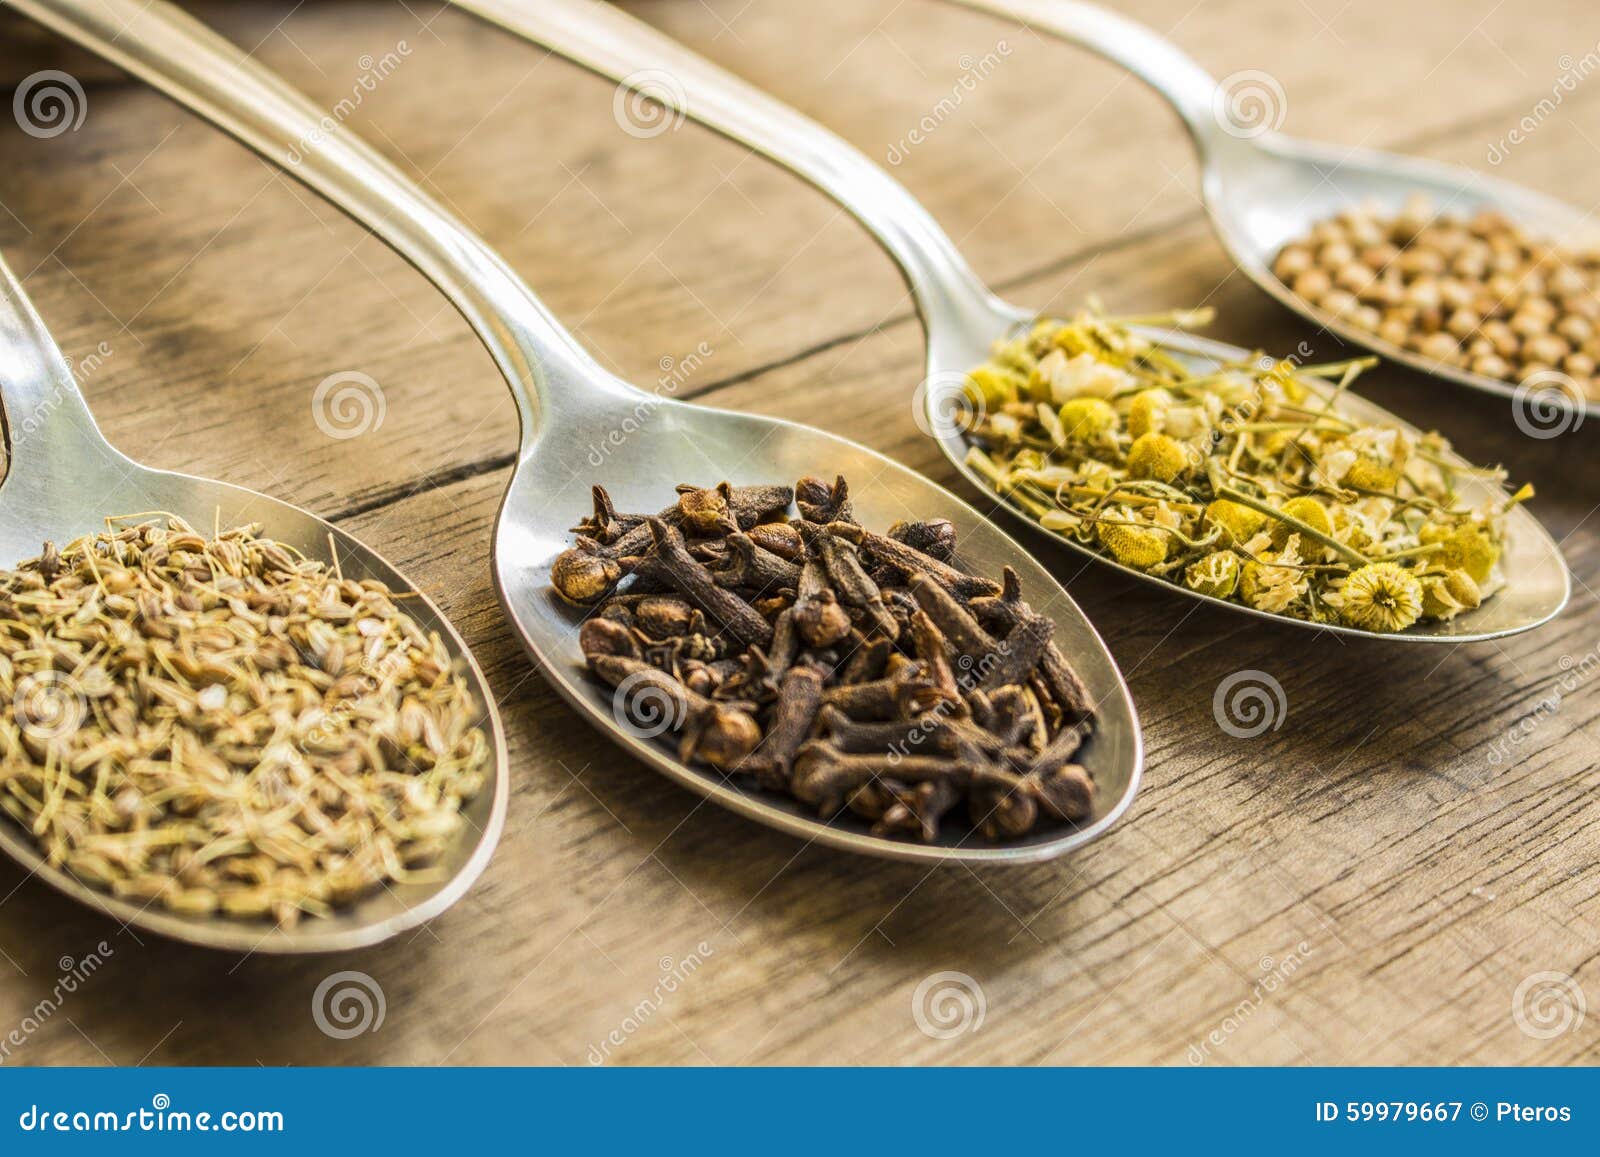 spices and herbal tea ingredients on spoons